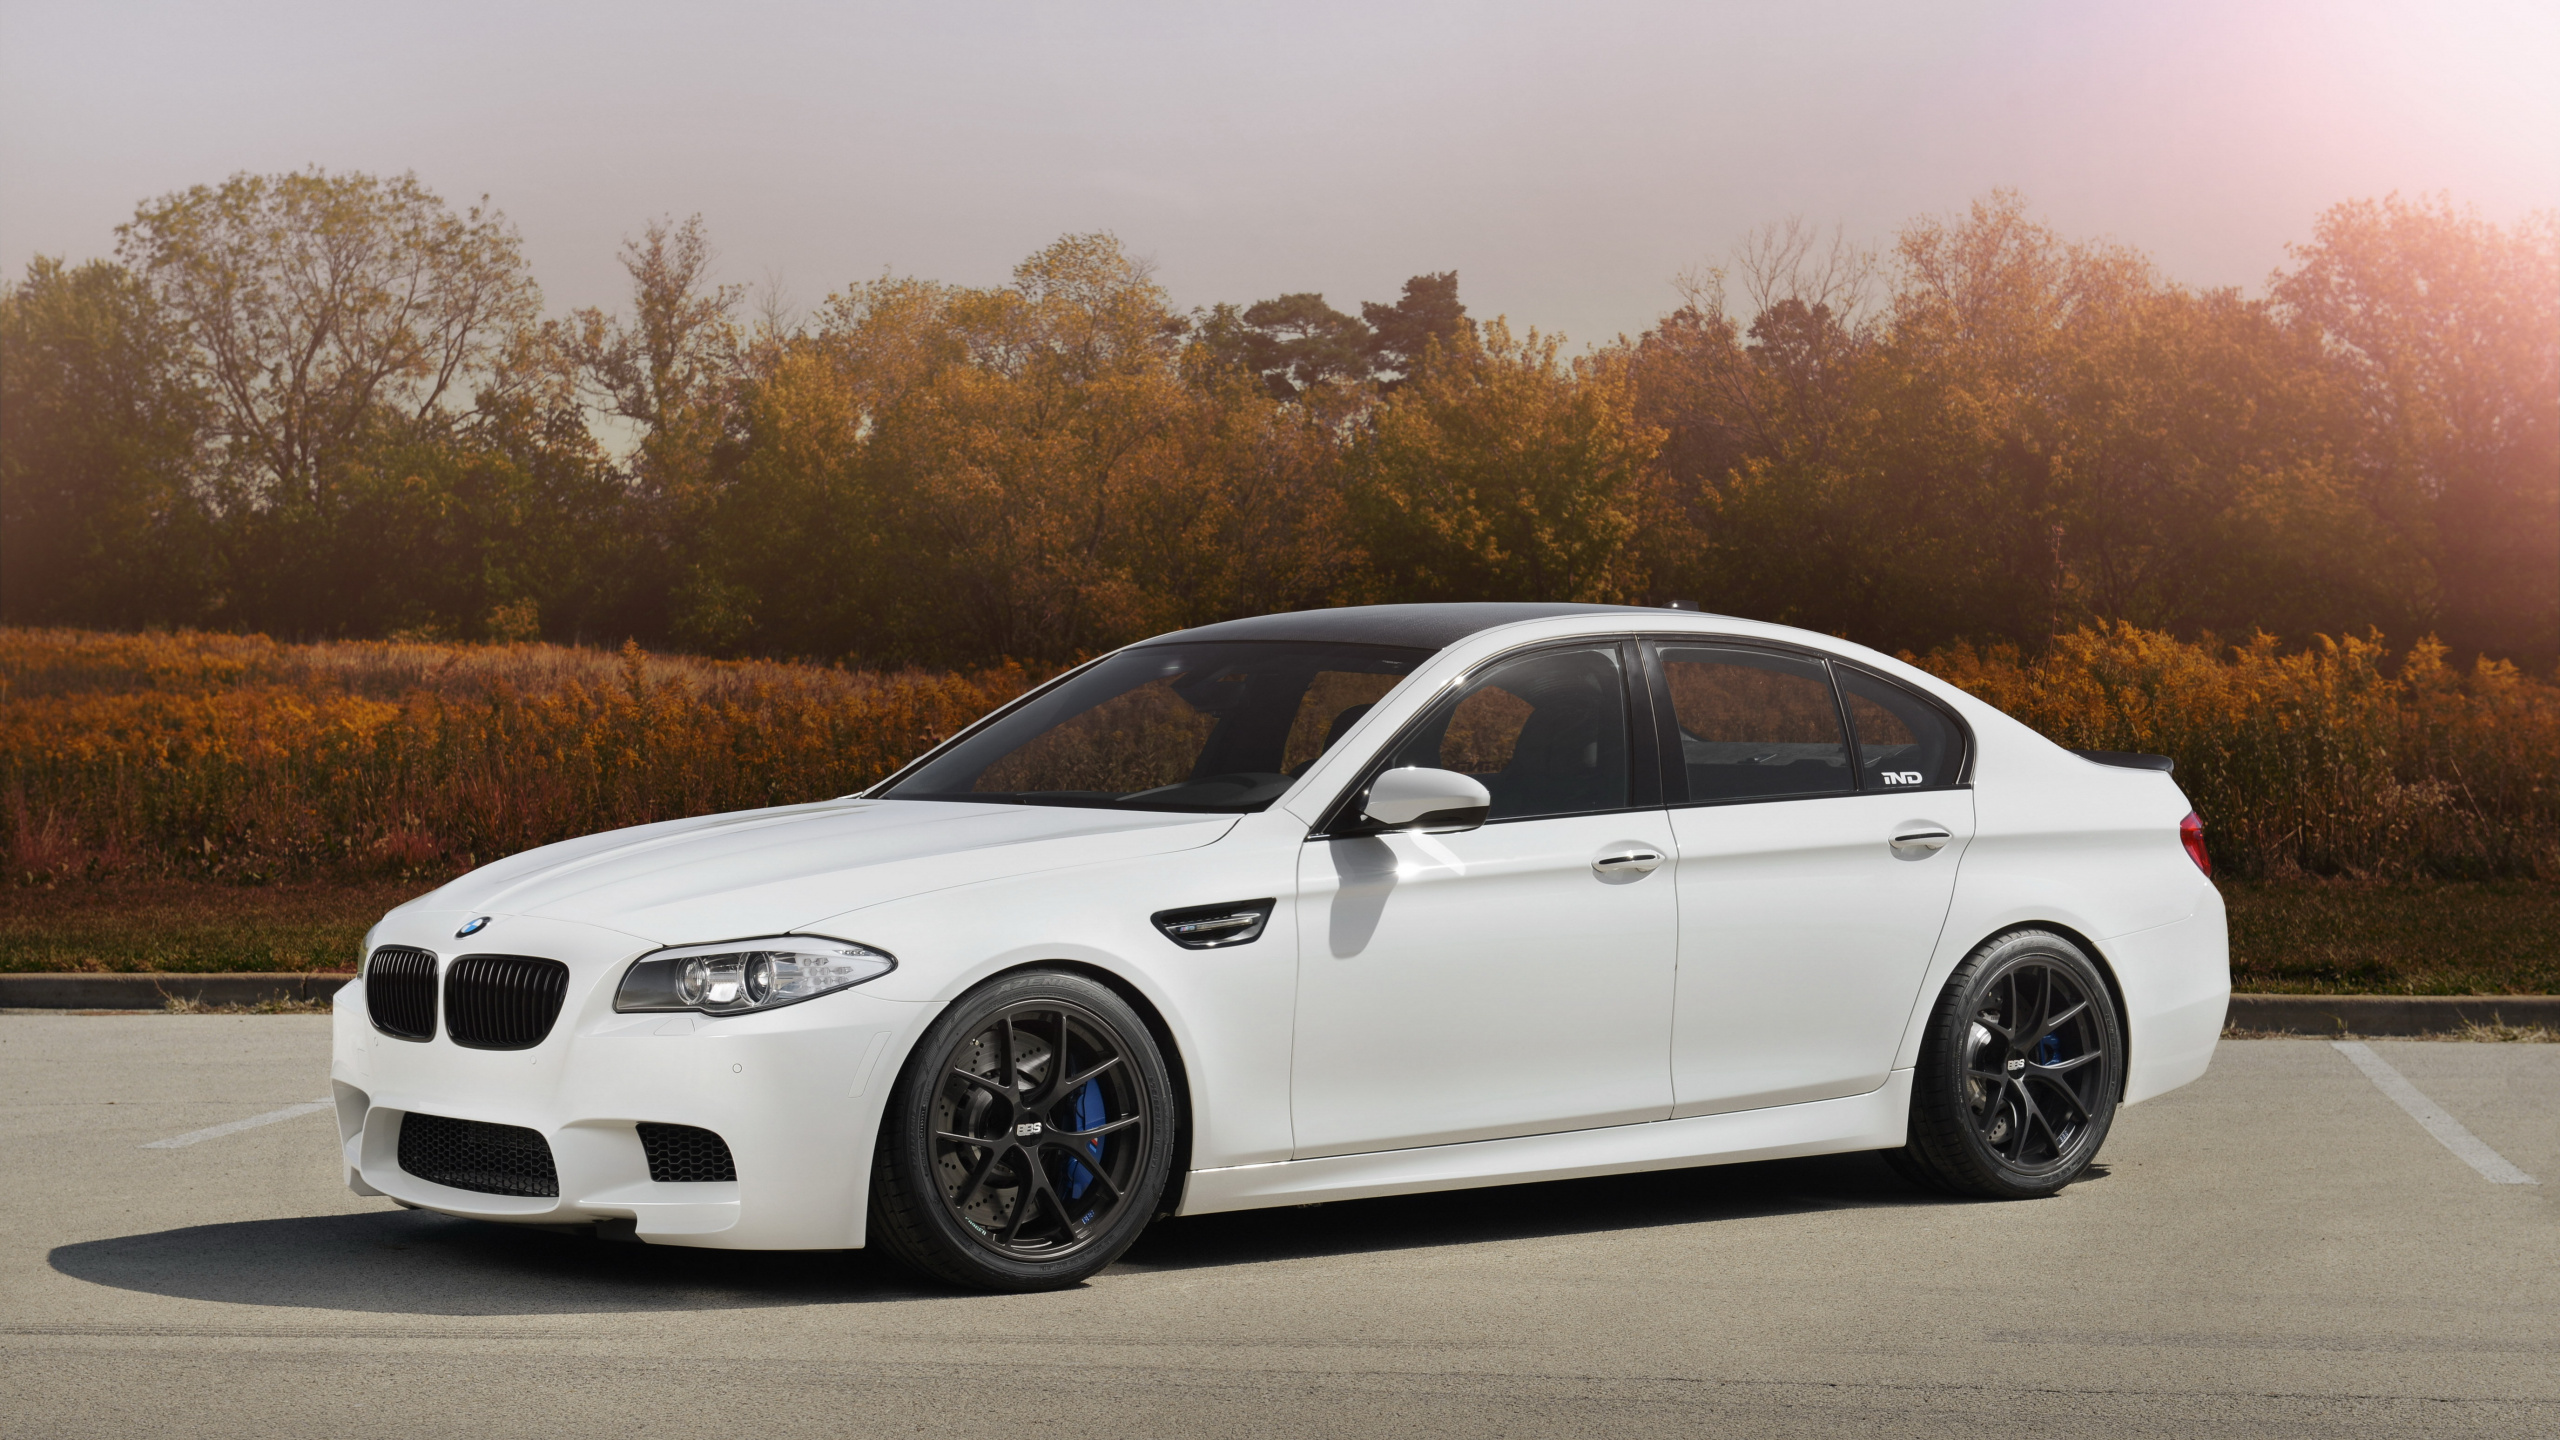 White Bmw m 3 Coupe Parked on Gray Asphalt Road During Daytime. Wallpaper in 2560x1440 Resolution